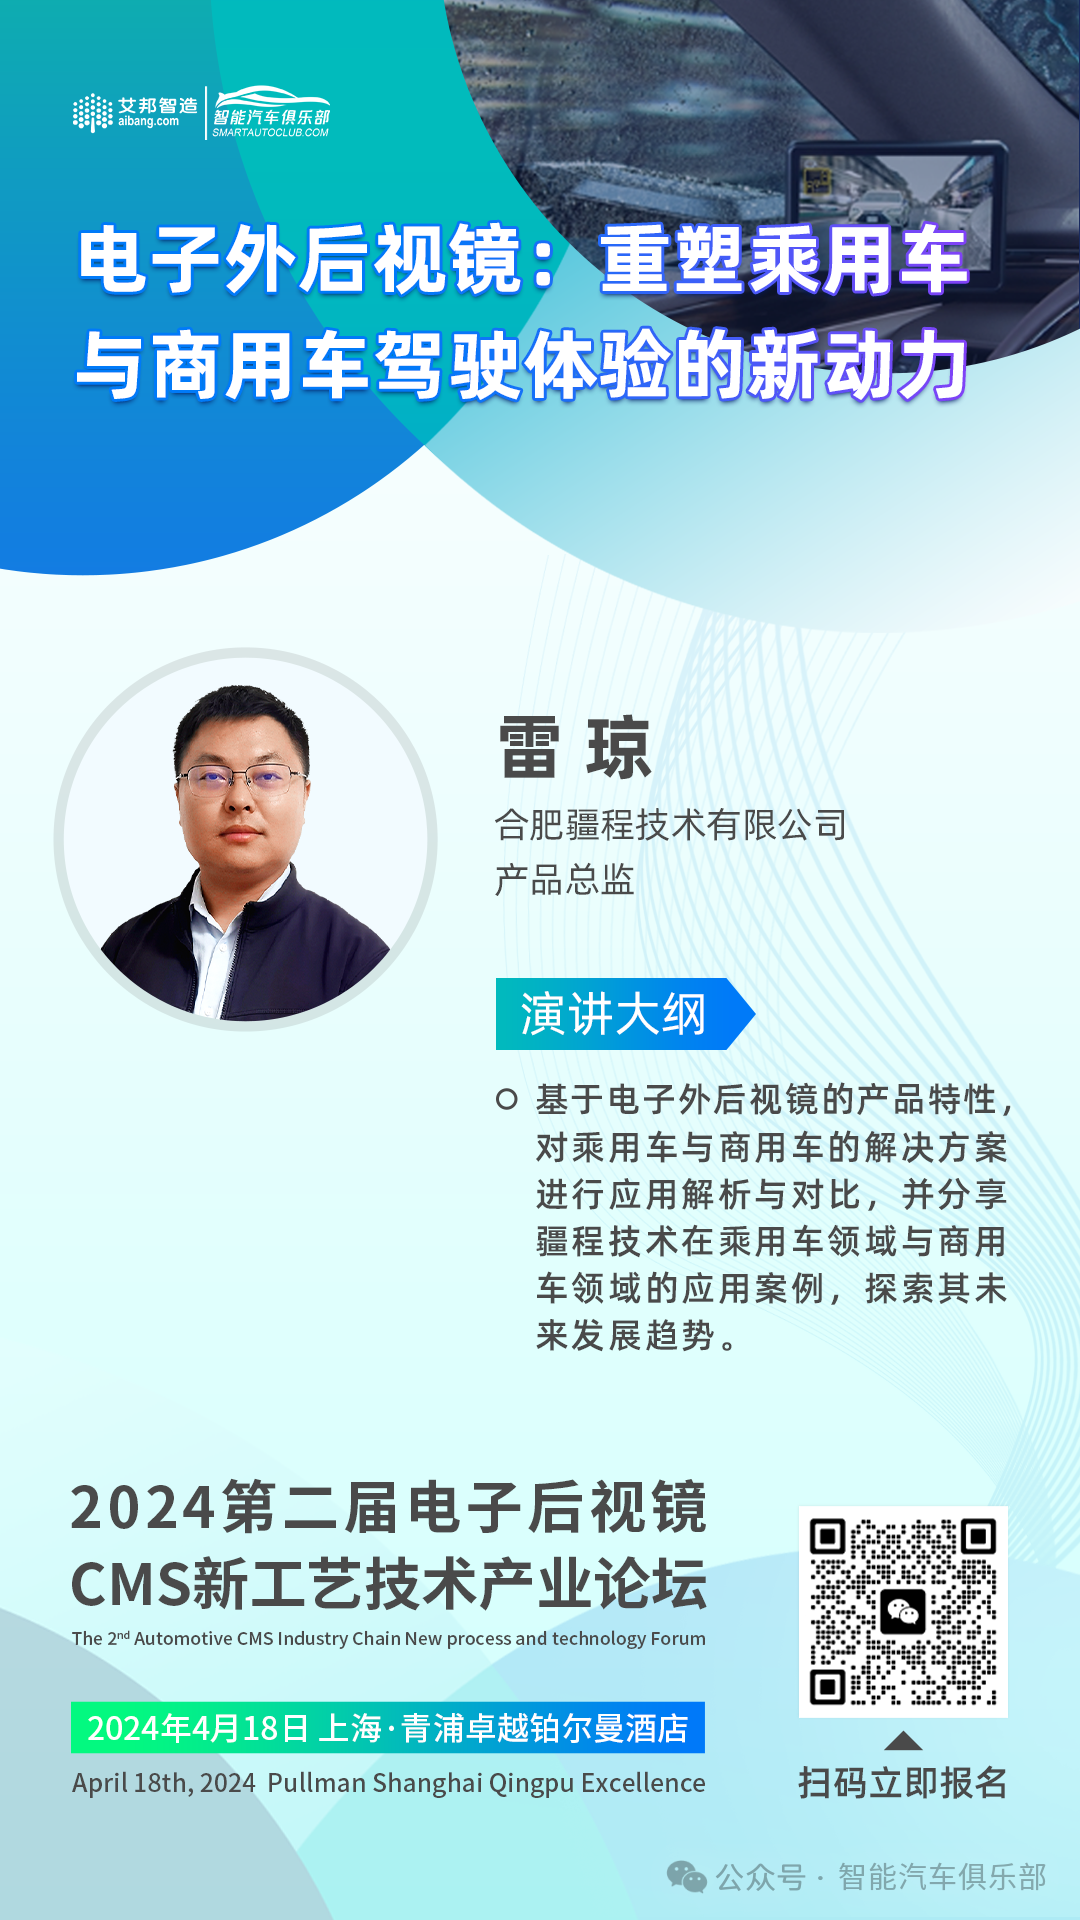 Jiangcheng Technology Keynote Speech - "Electronic Exterior Rearview Mirrors: New Power to Reshape the Driving Experience of Passenger Cars and Commercial Vehicles"